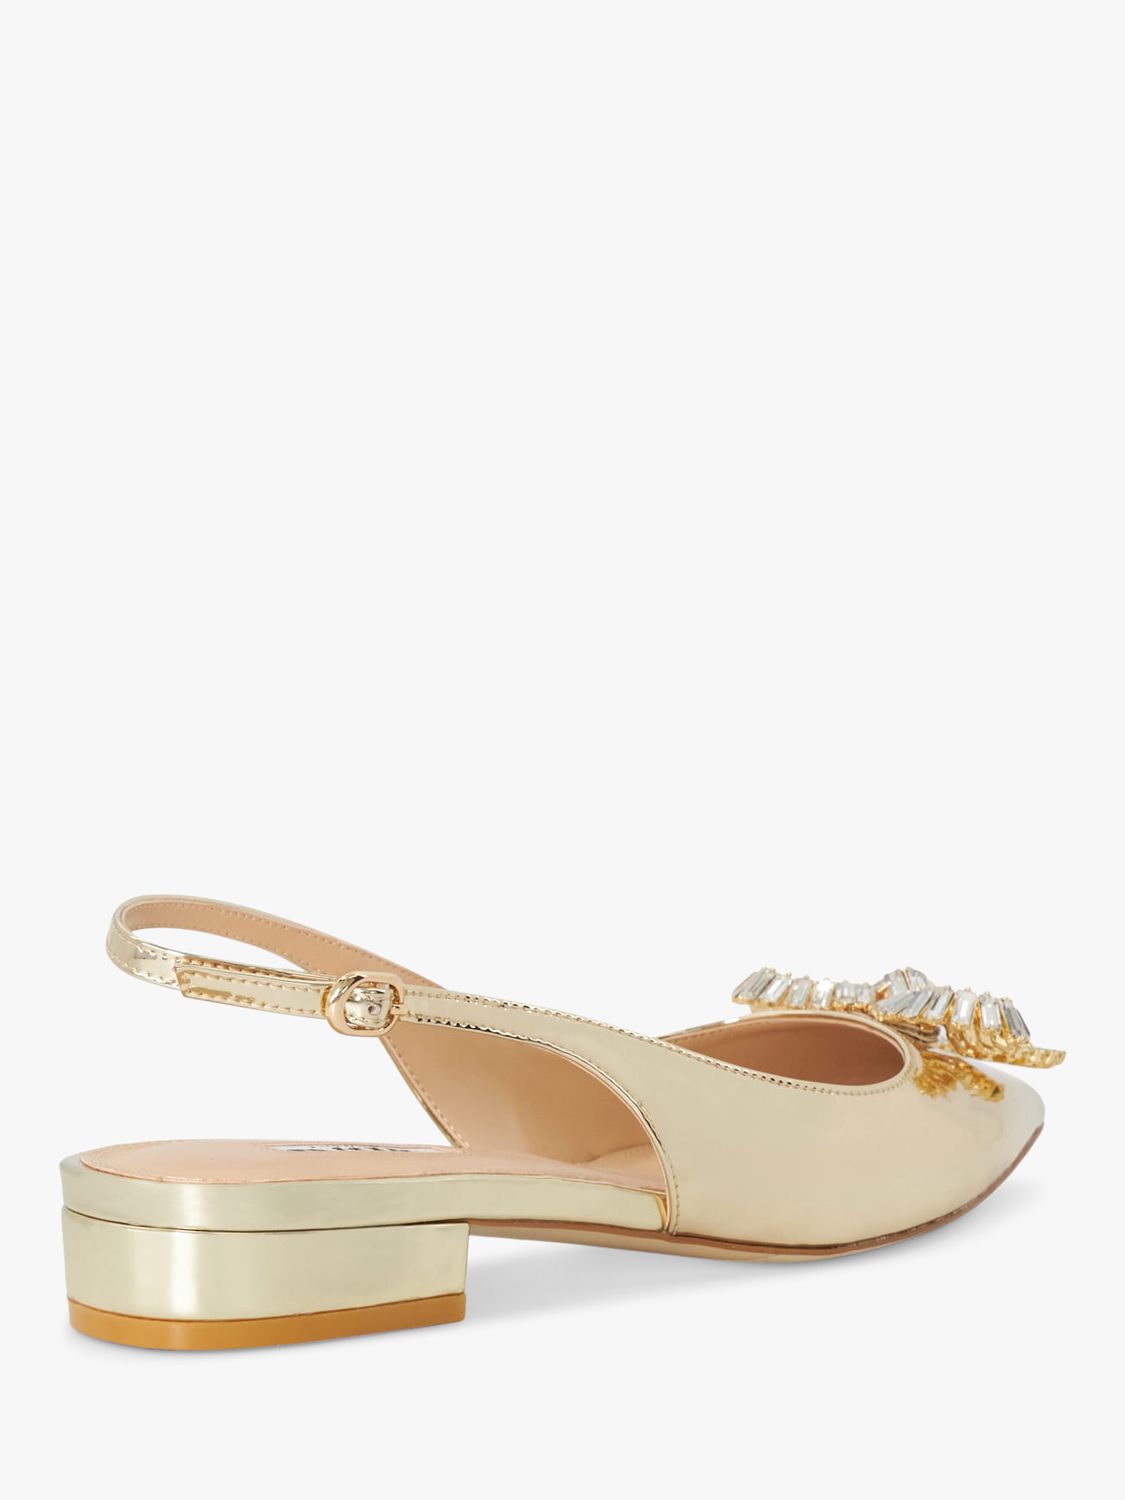 Dune Happiest Patent Bow Embellished Slingback Flats, Gold, 3